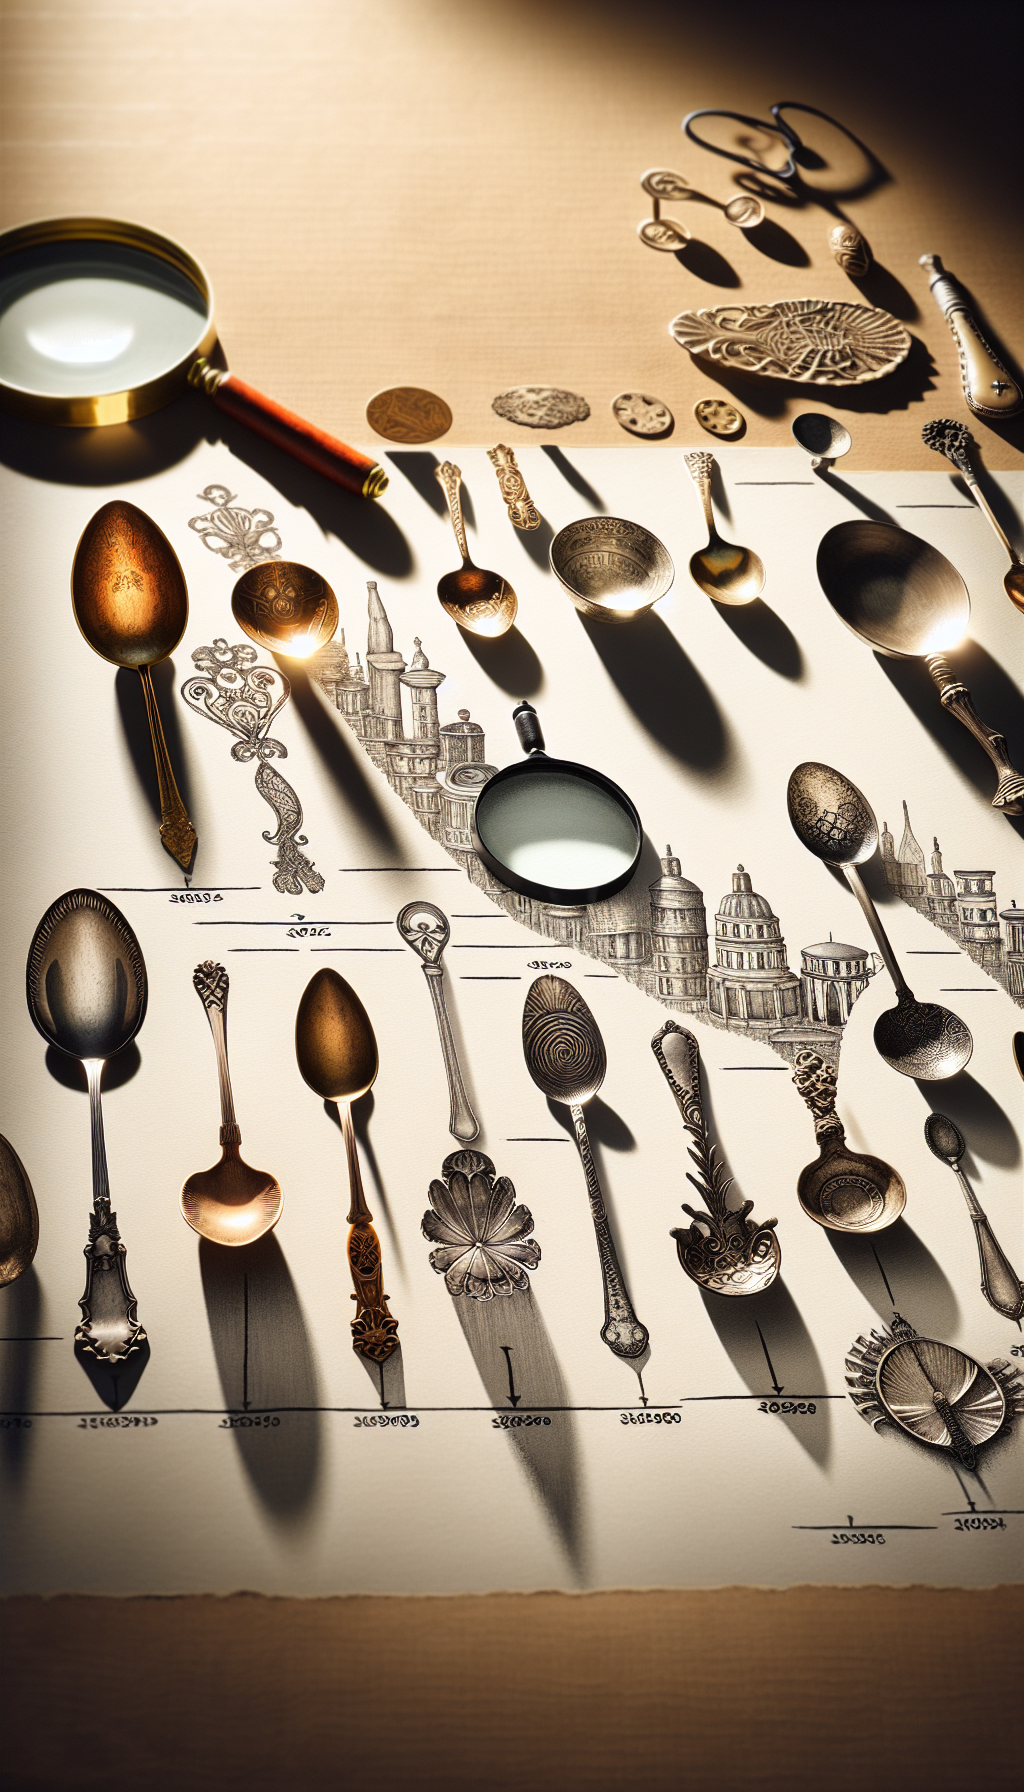 A whimsical timeline unfurls across the page, with ornately decorated, collectible spoons from different eras serving as the timeline's key markers. Each spoon casts a shadow morphing into a detective magnifying glass, symbolizing the quest for antique spoon identification, while background elements subtly transition to mirror the design aesthetics of each respective century.